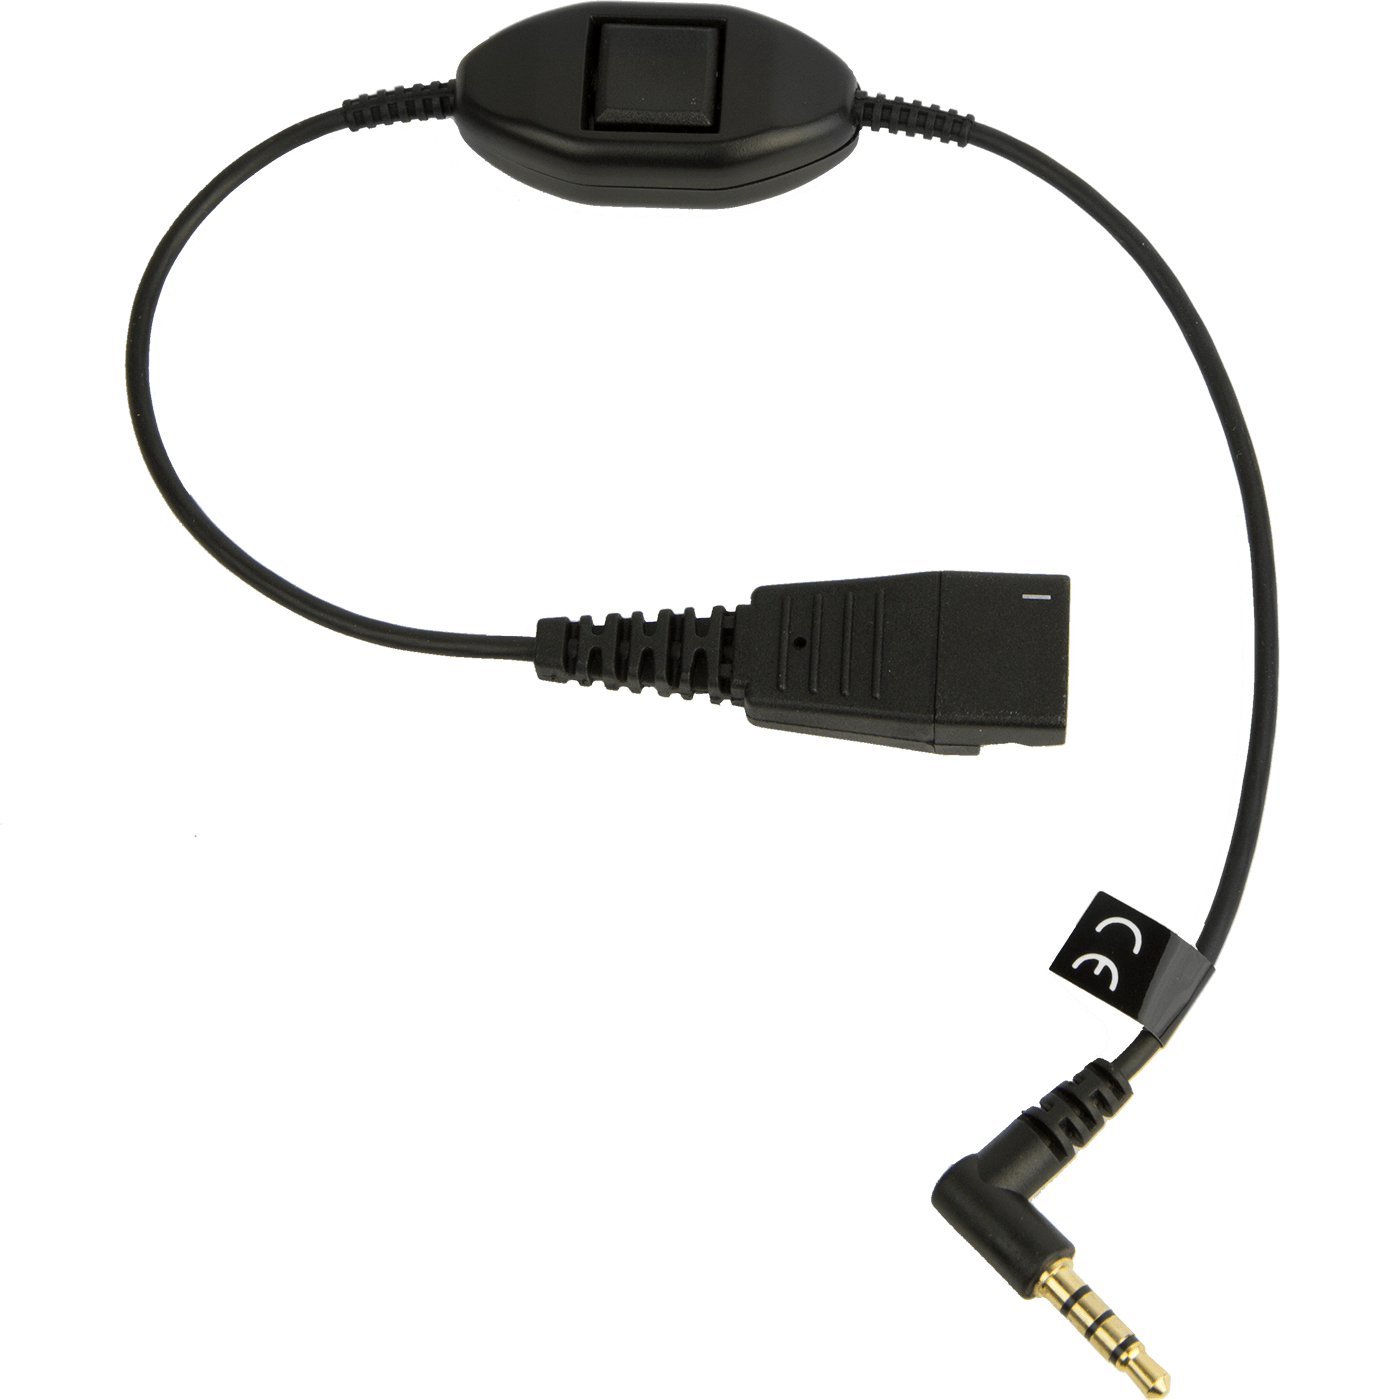 Gn Audio - Business              Link Mobile Qd To 3.5 Mm W.ptt      Supervisor Cord                     8800-00-103